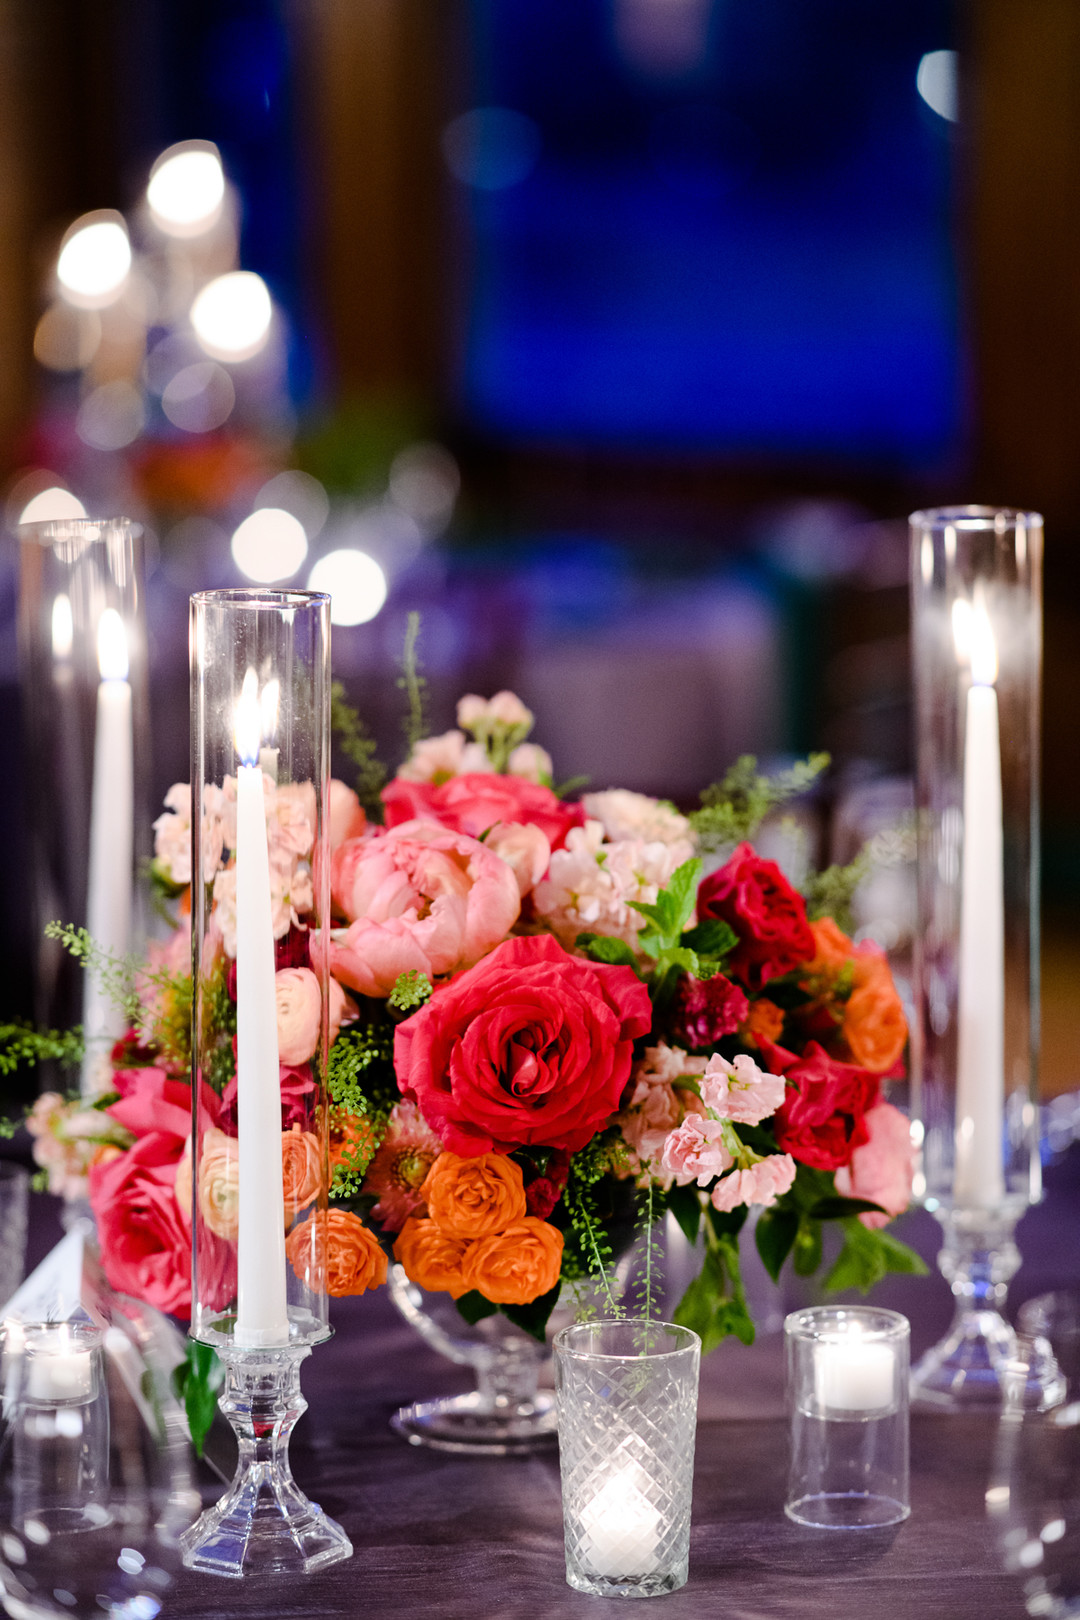 Wedding centerpieces: Timeless and colorful Chicago wedding in Lincoln Park captured by StudioThisIs. See more wedding ideas at CHItheeWED.com!